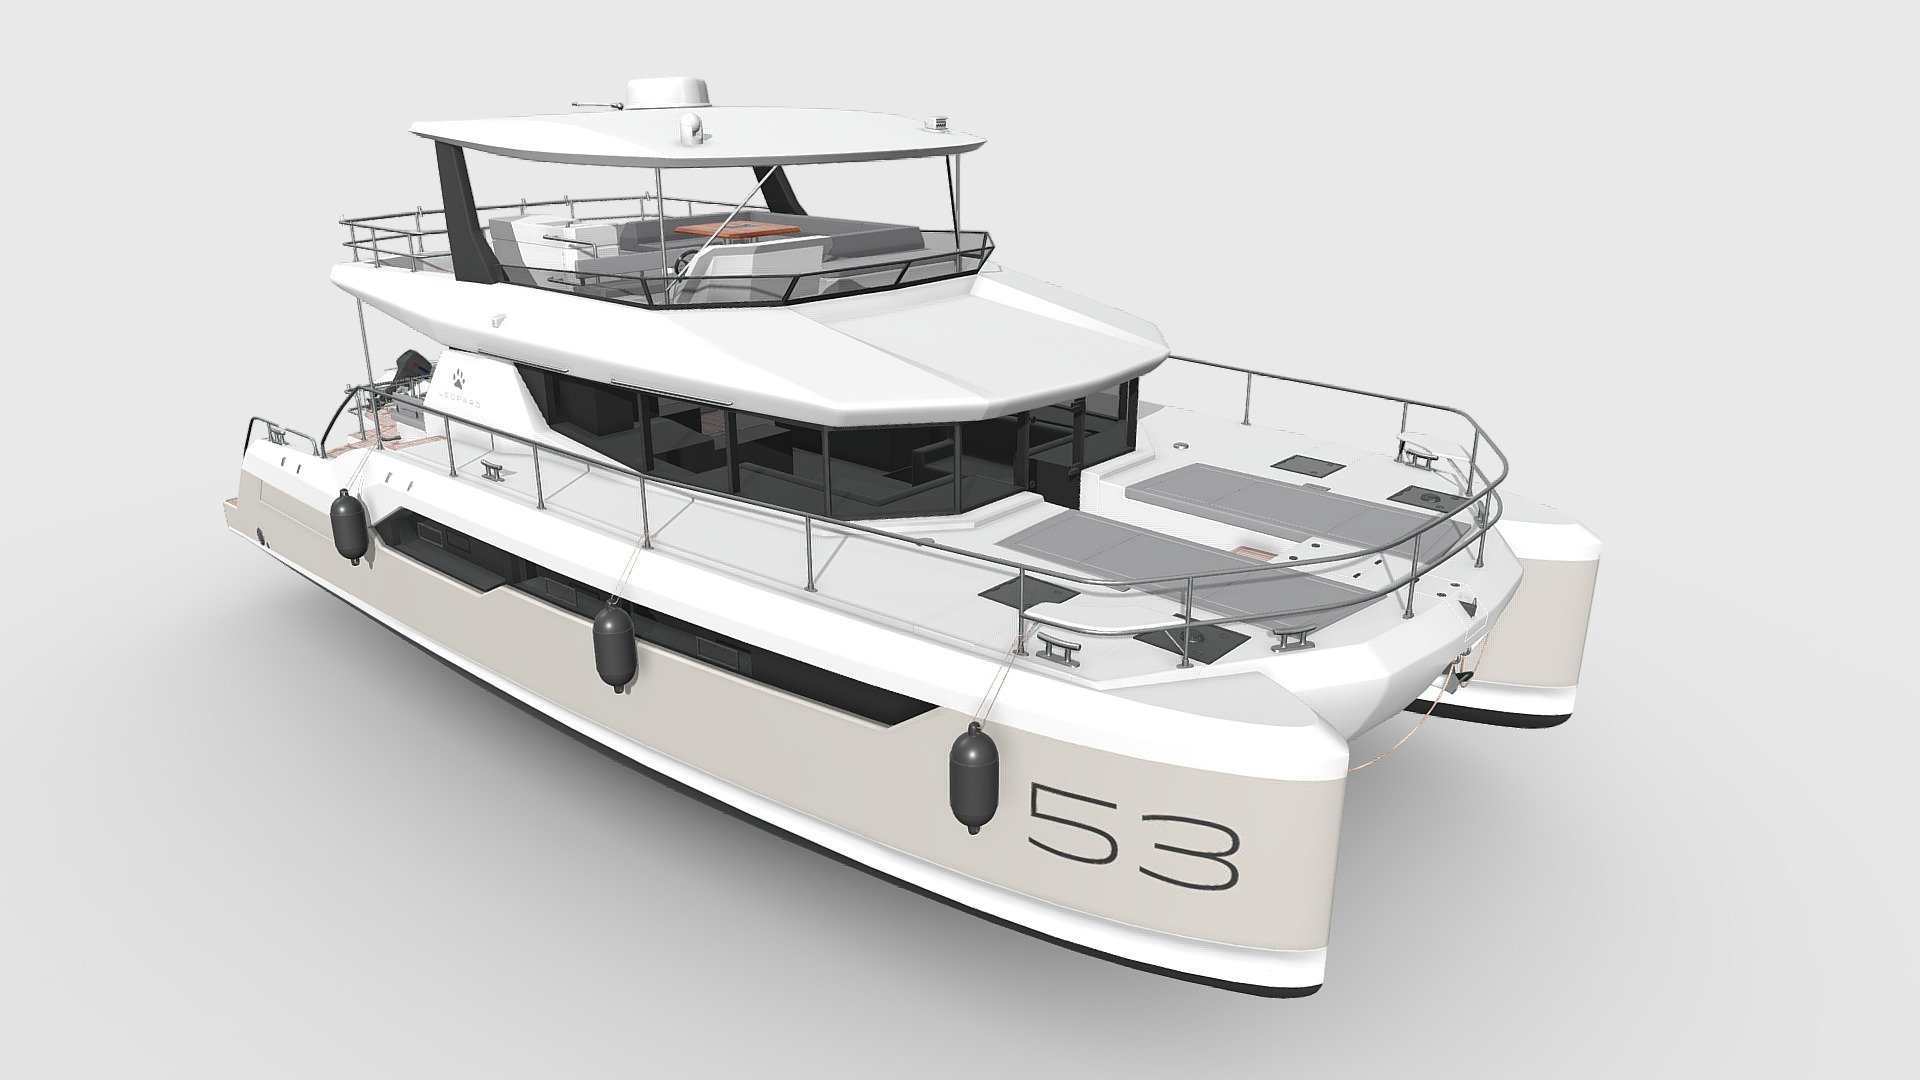 Detailed Leopard 53 Powercat ushers in the 4th generation with a yacht that features all the attributes that made her predecessor successful.
This is a beautiful 3D model prepared with attention to details and hardware performance.
The model is easily grouped, the sail can be quickly removed.
Model formats:
.max (3ds Max 2020 )
.fbx (Multi Format)
.obj (Multi Format)
.ma (Maya 2019)

Best Regards 3d model